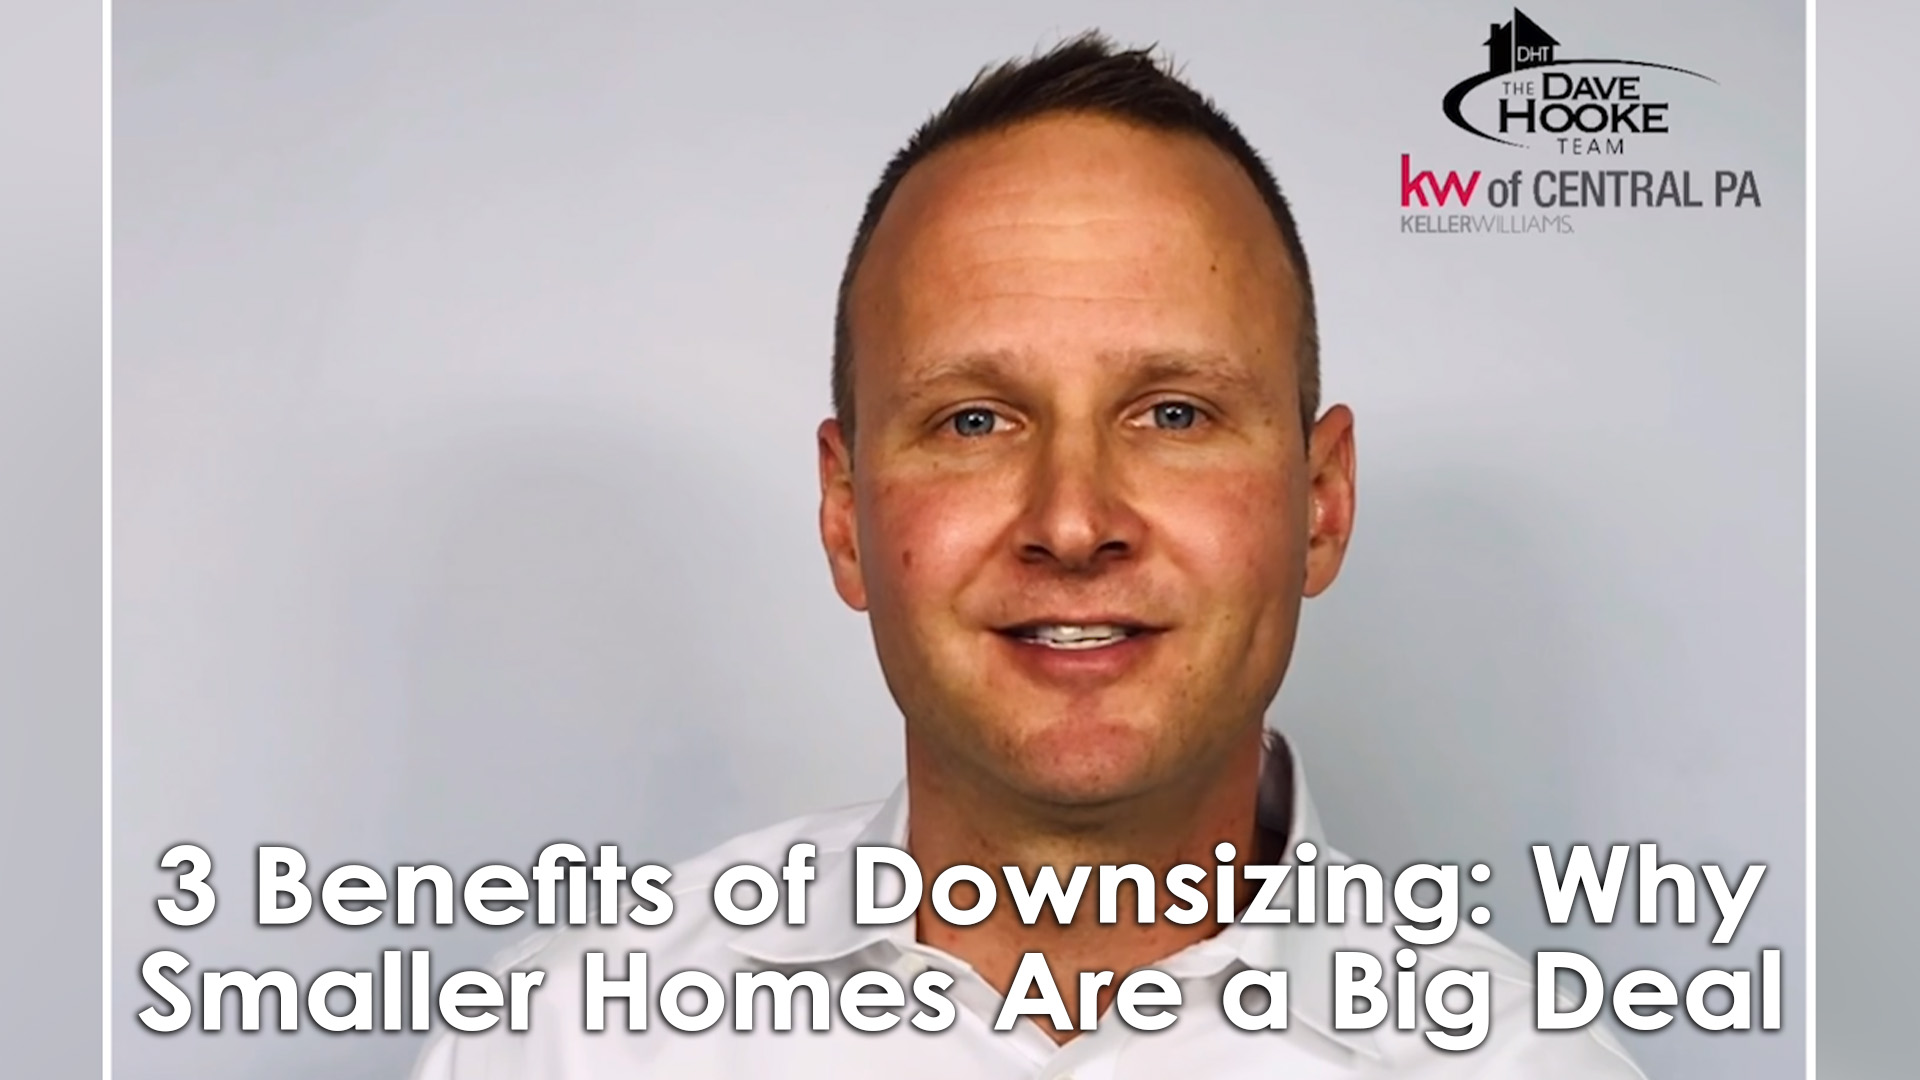 Simplify Your Life and Save Money: 3 Advantages of Downsizing